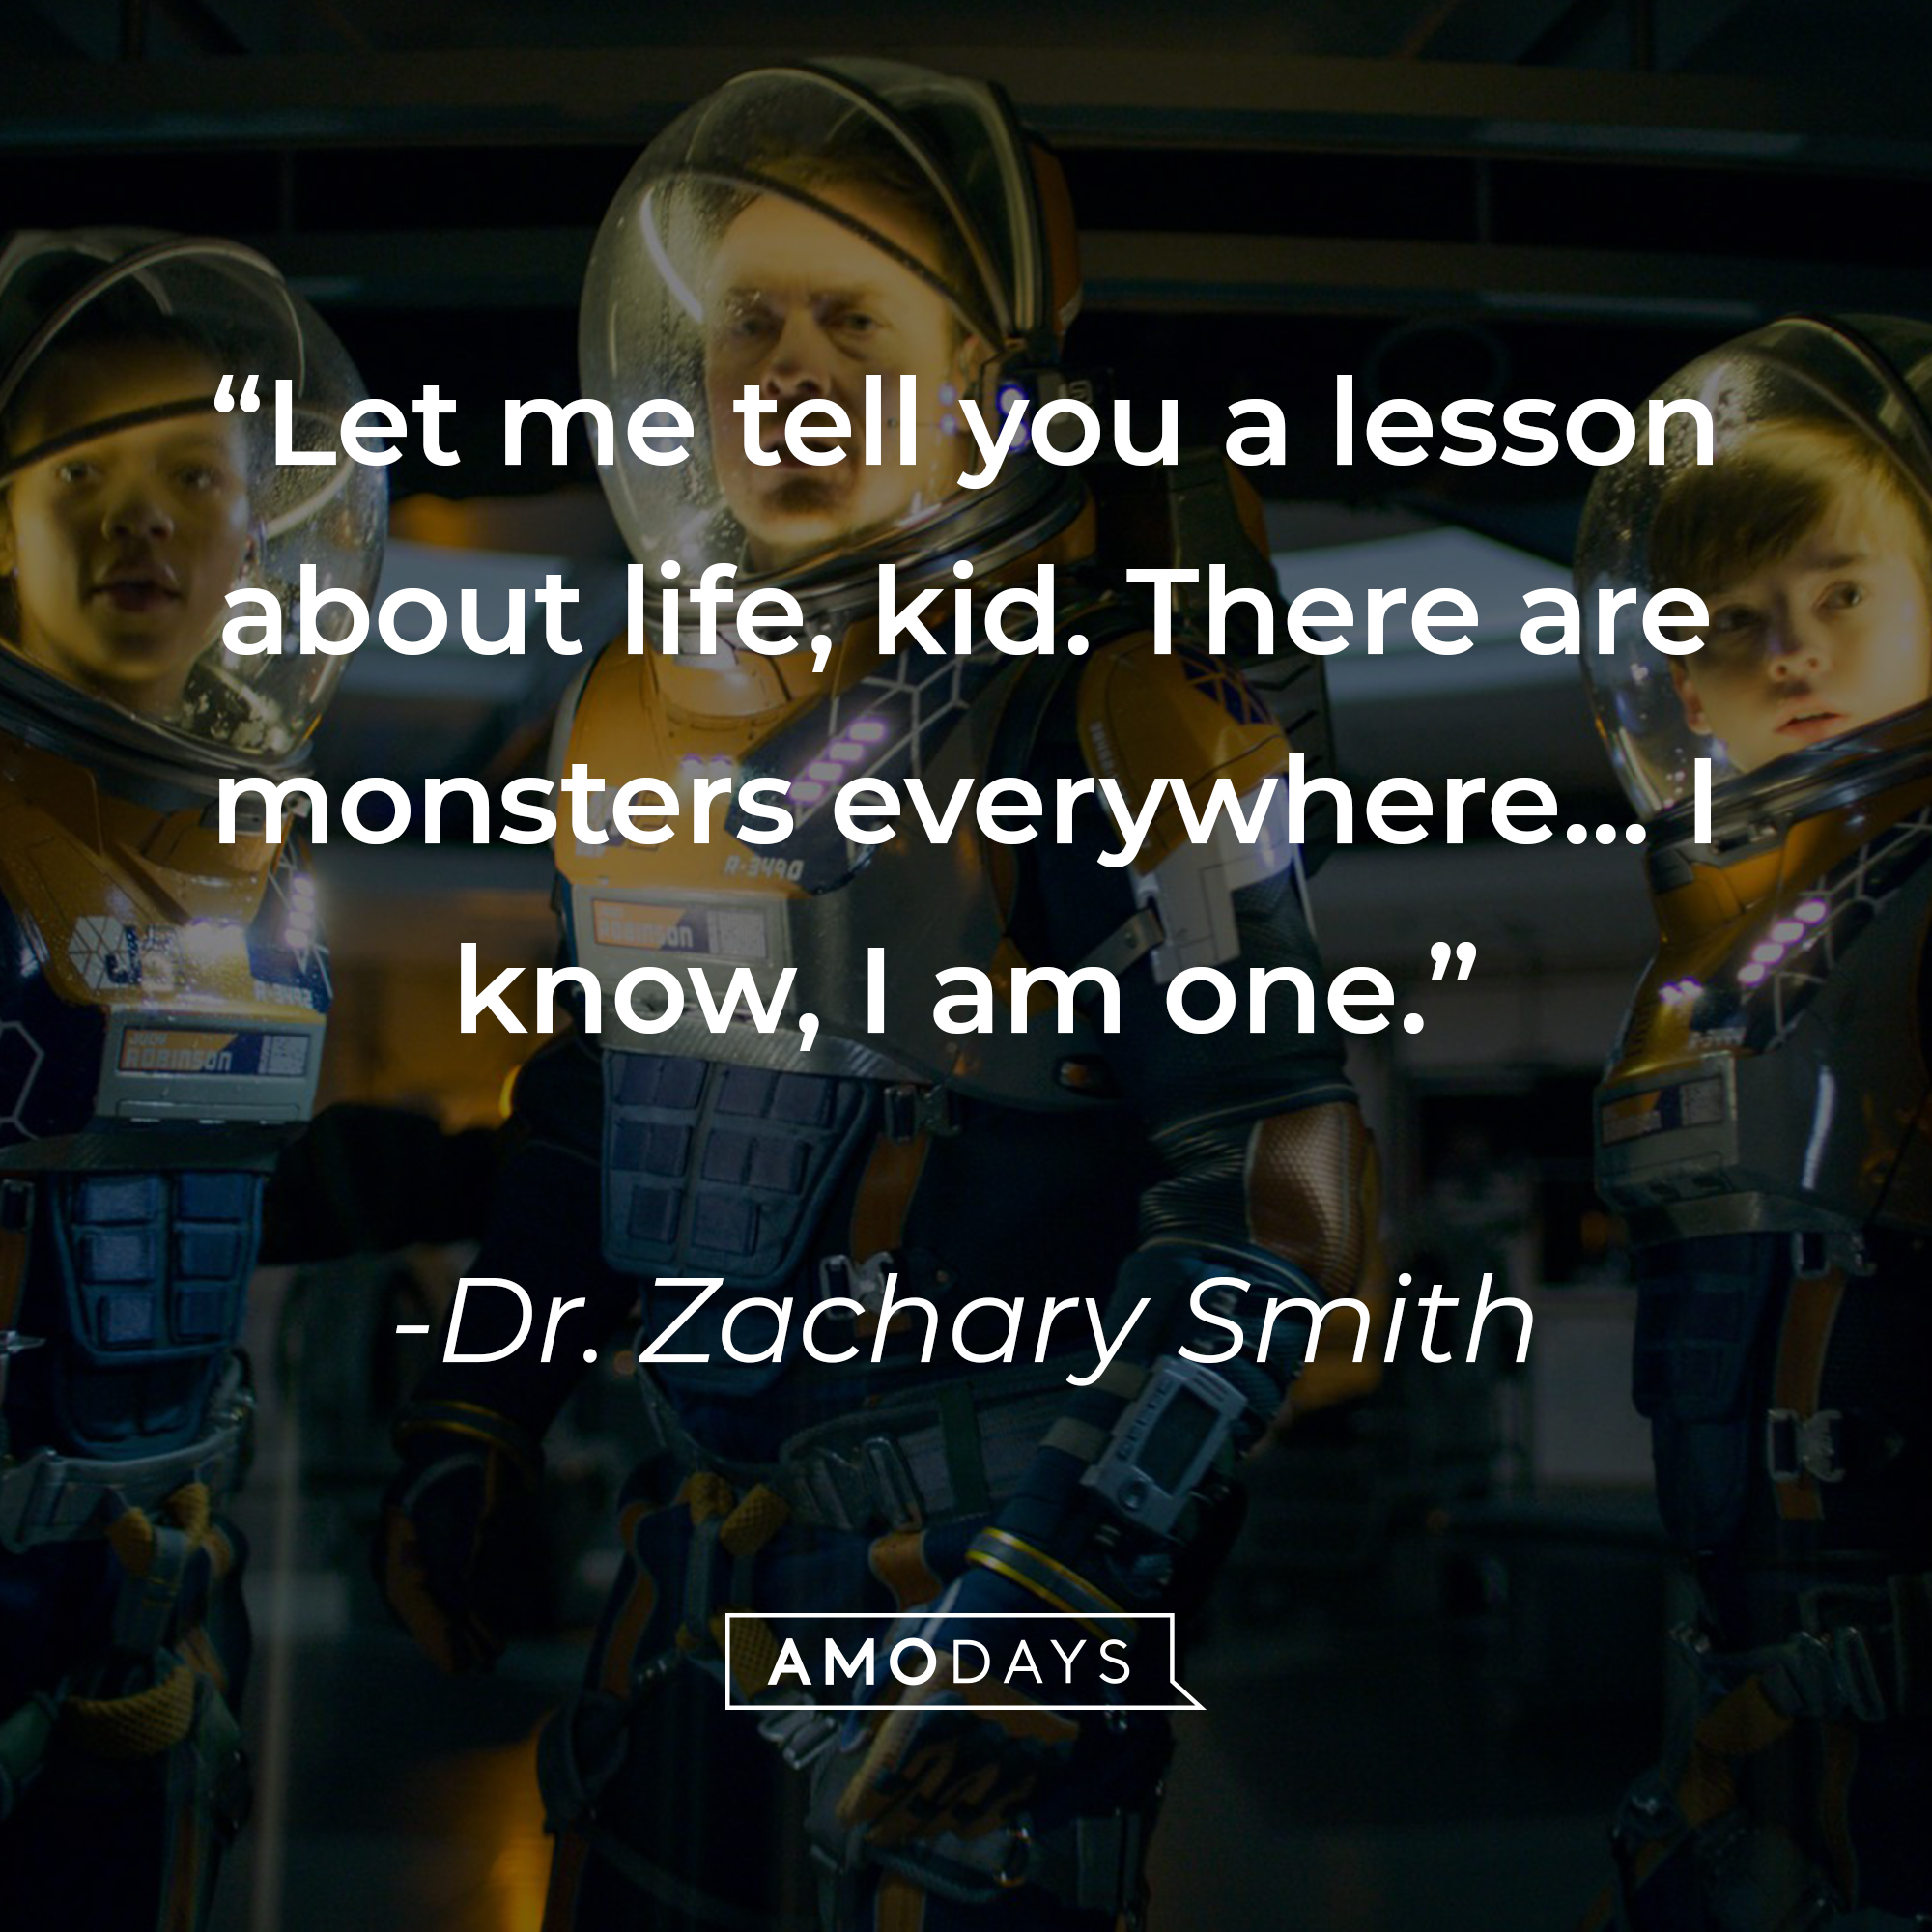 Dr. Zachary Smith’s quote: "Let me tell you a lesson about life, kid. There are monsters everywhere... I know, I am one." | Image: Facebook.com/lostinspacenetflix